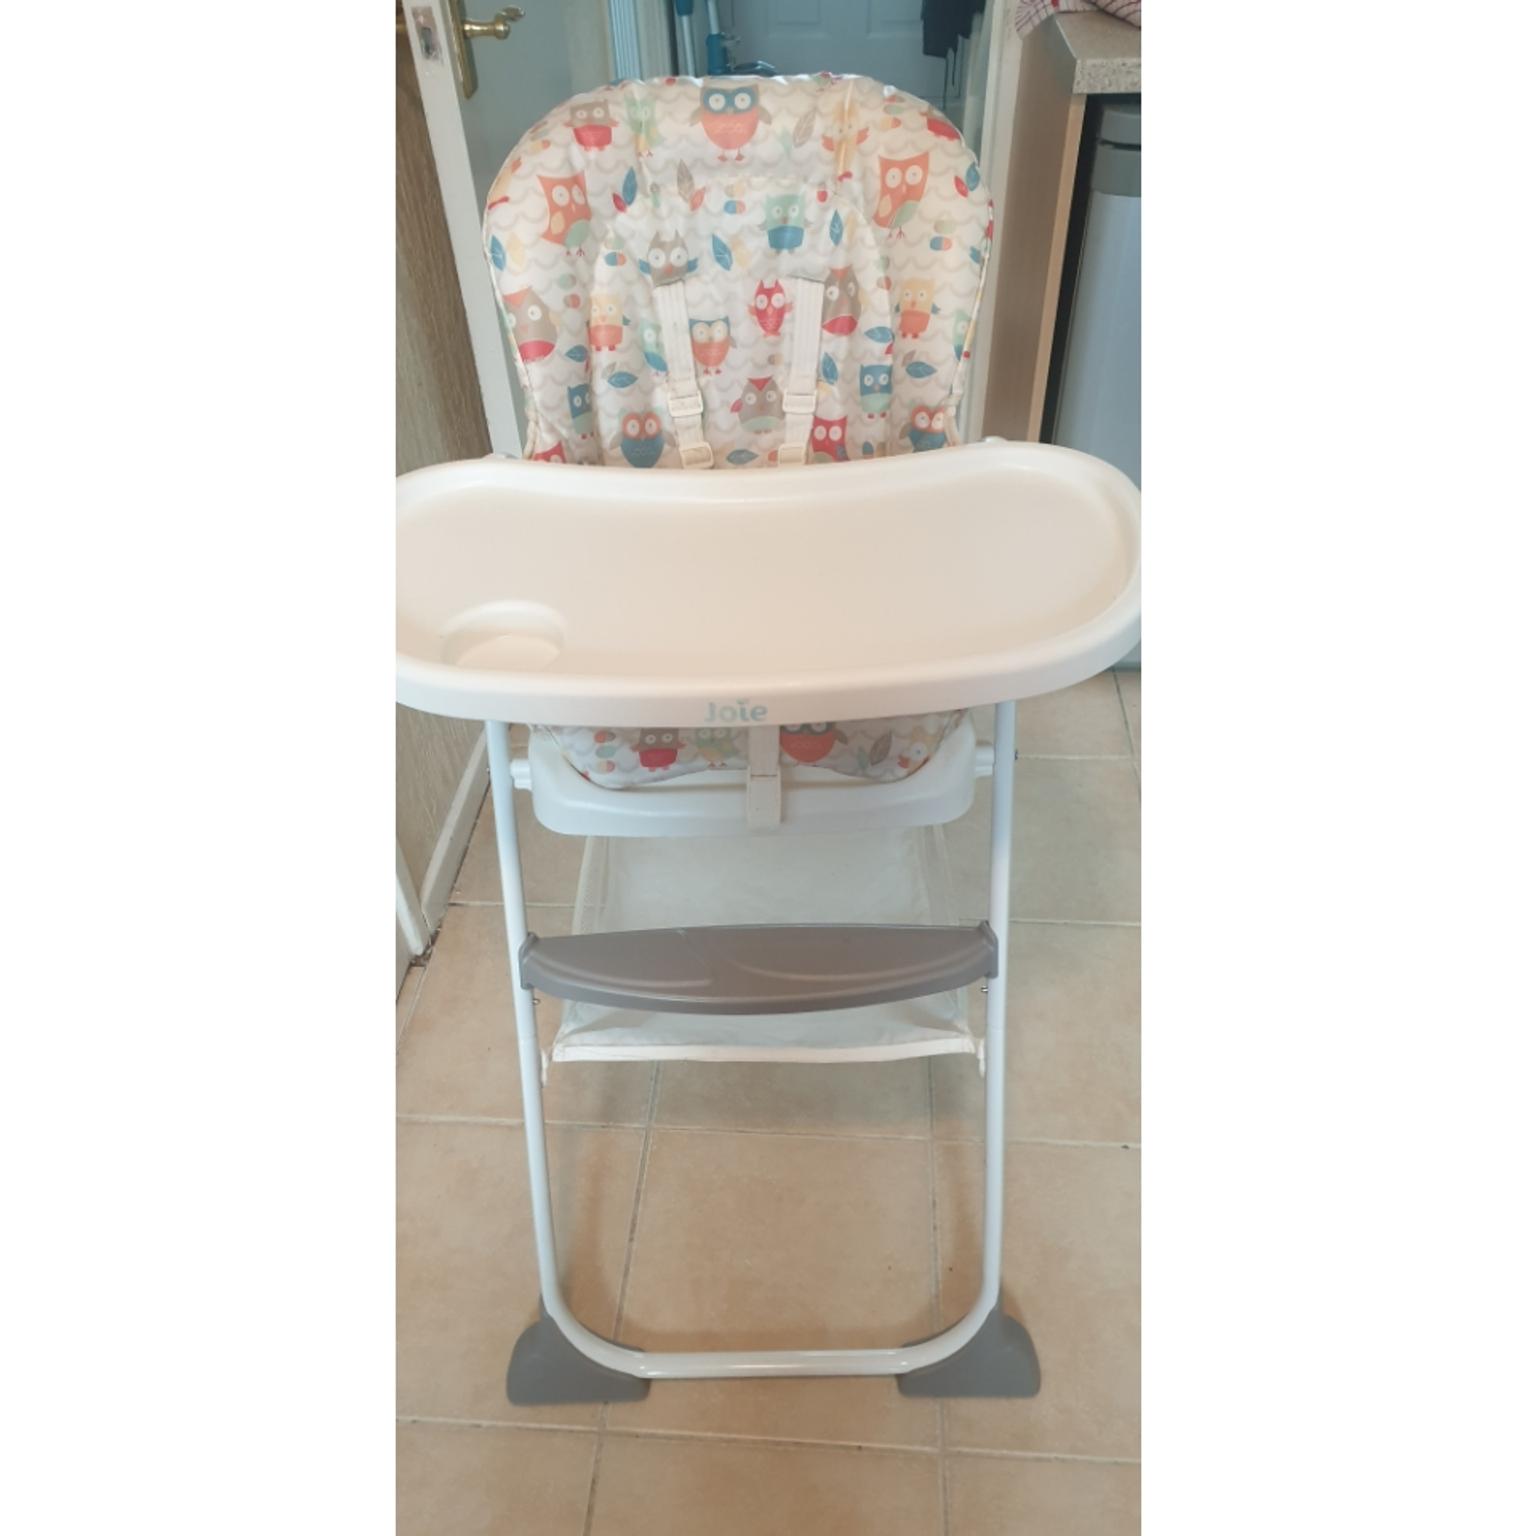 Joie Owl Print Folding Highchair In Tf4 Dawley For 15 00 For Sale